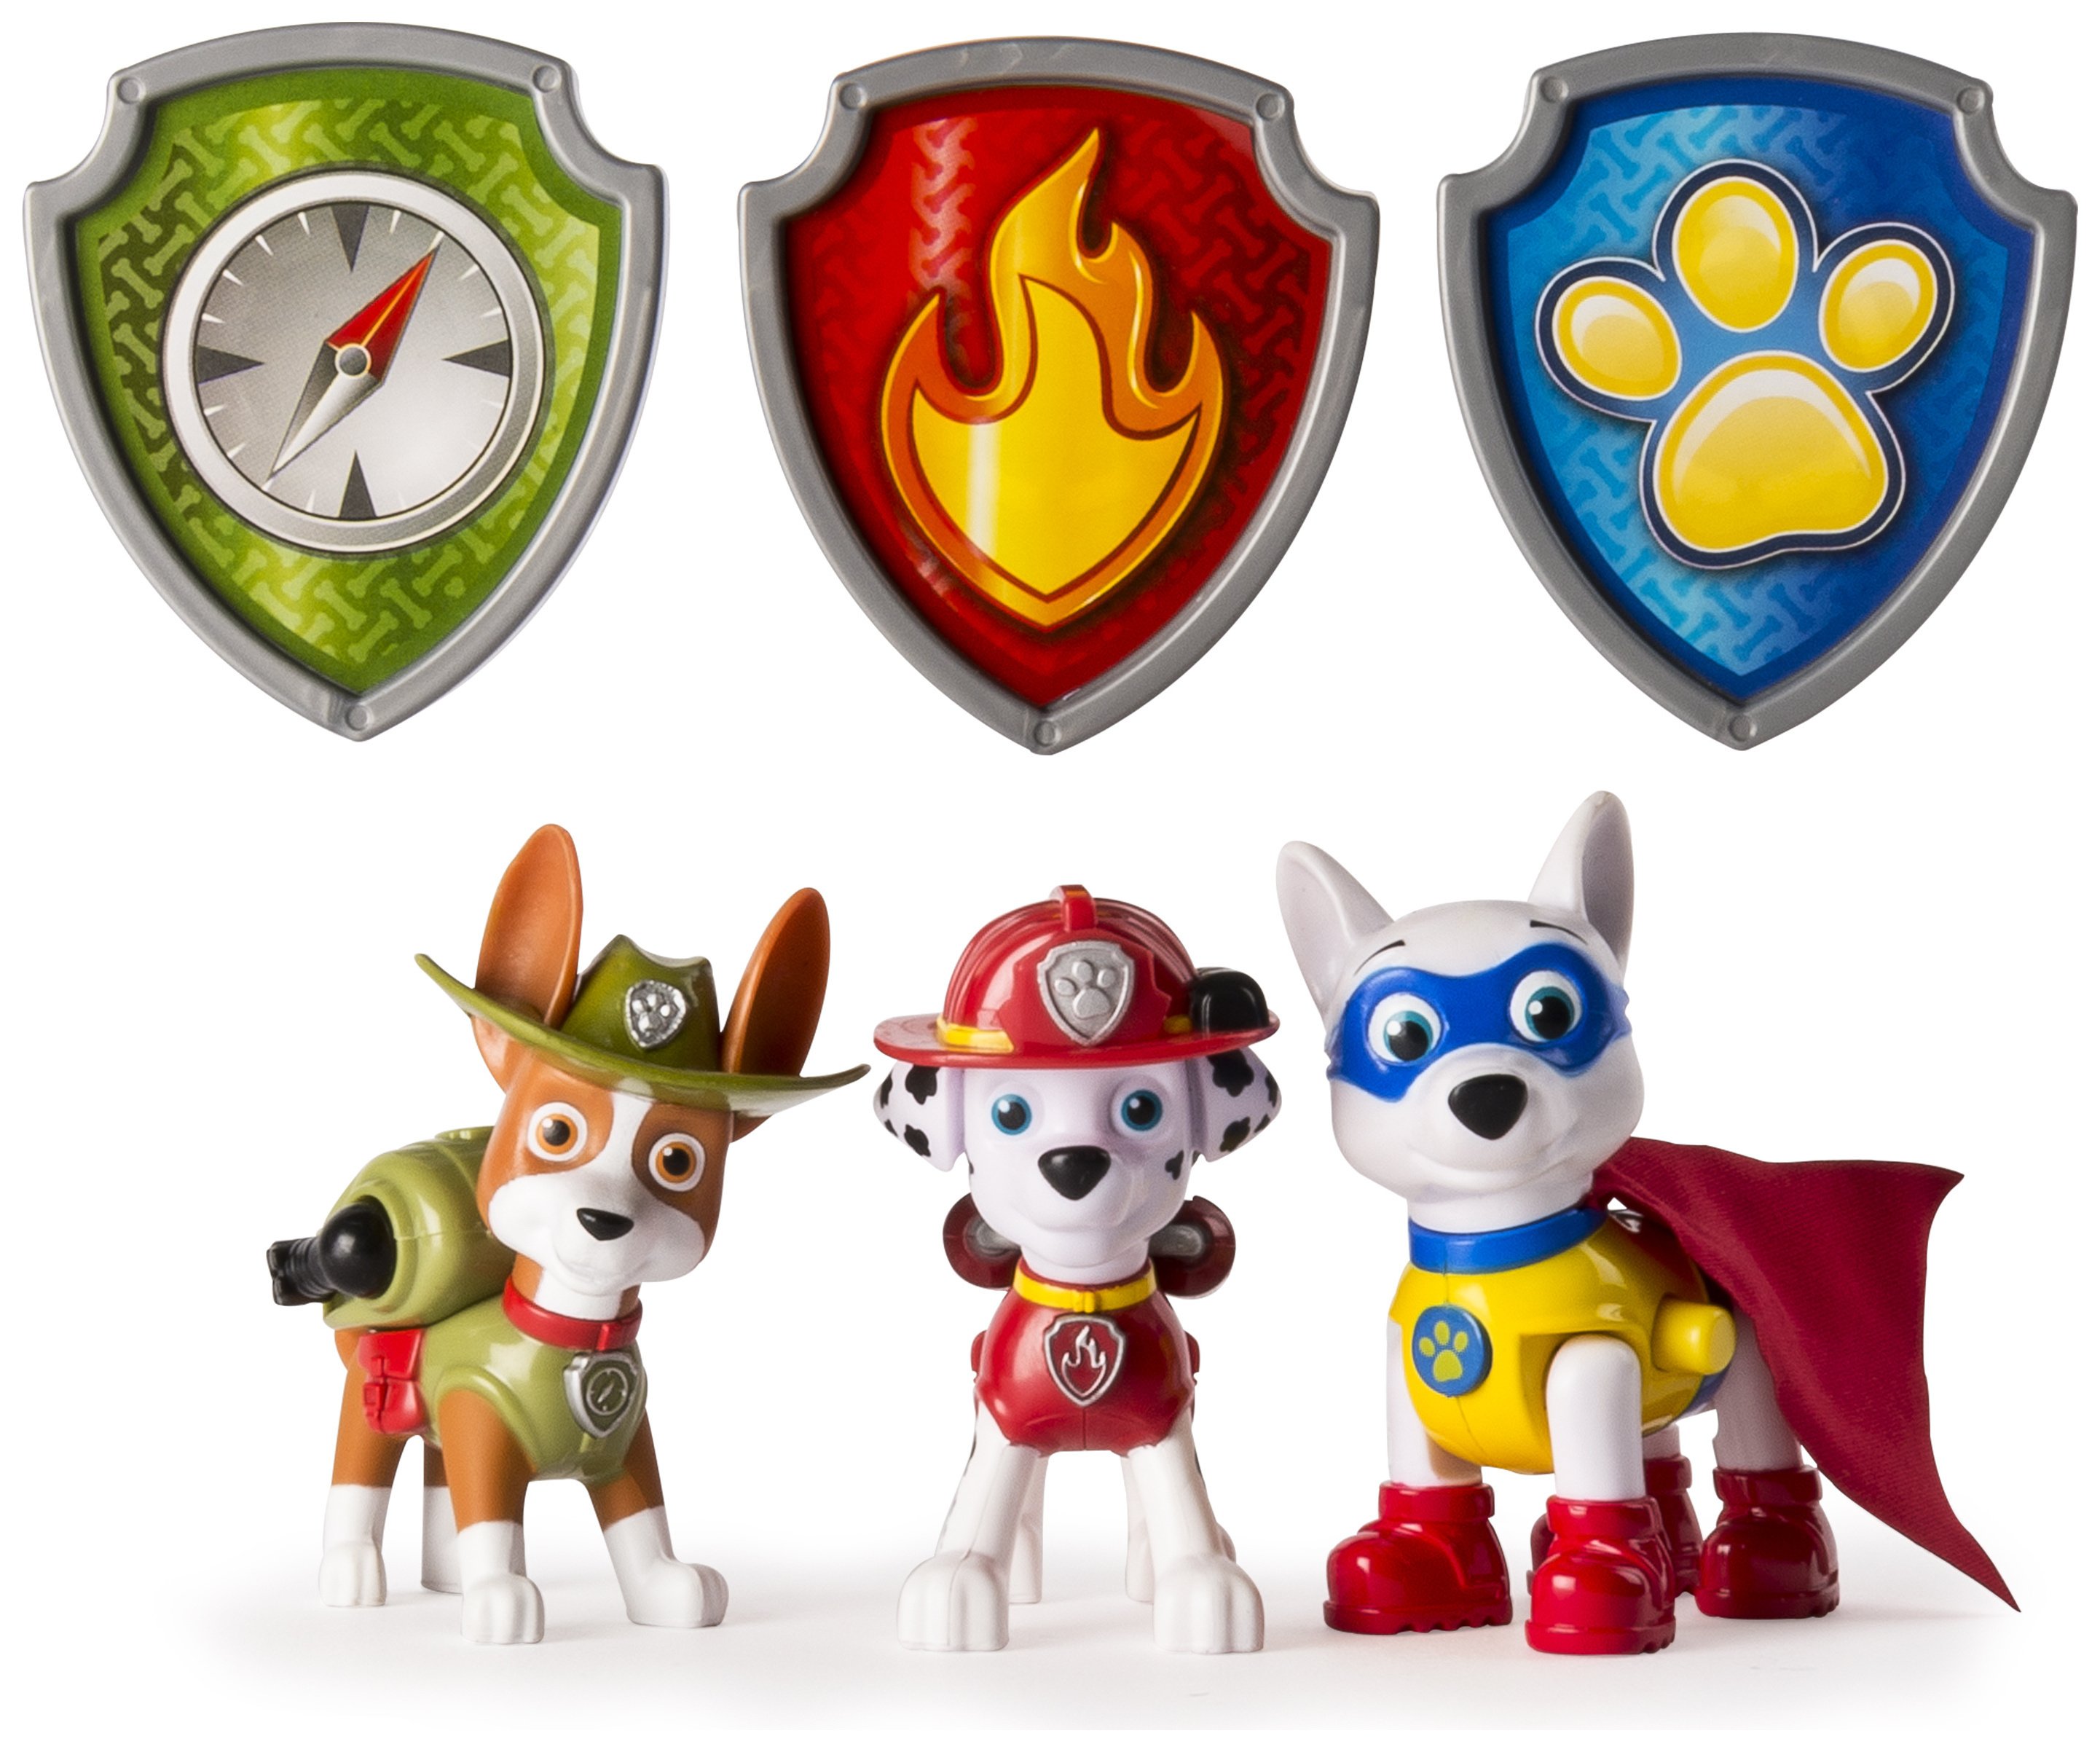 Paw Patrol Set 2 Action Pack Pups 3 Pack Review Review Toys